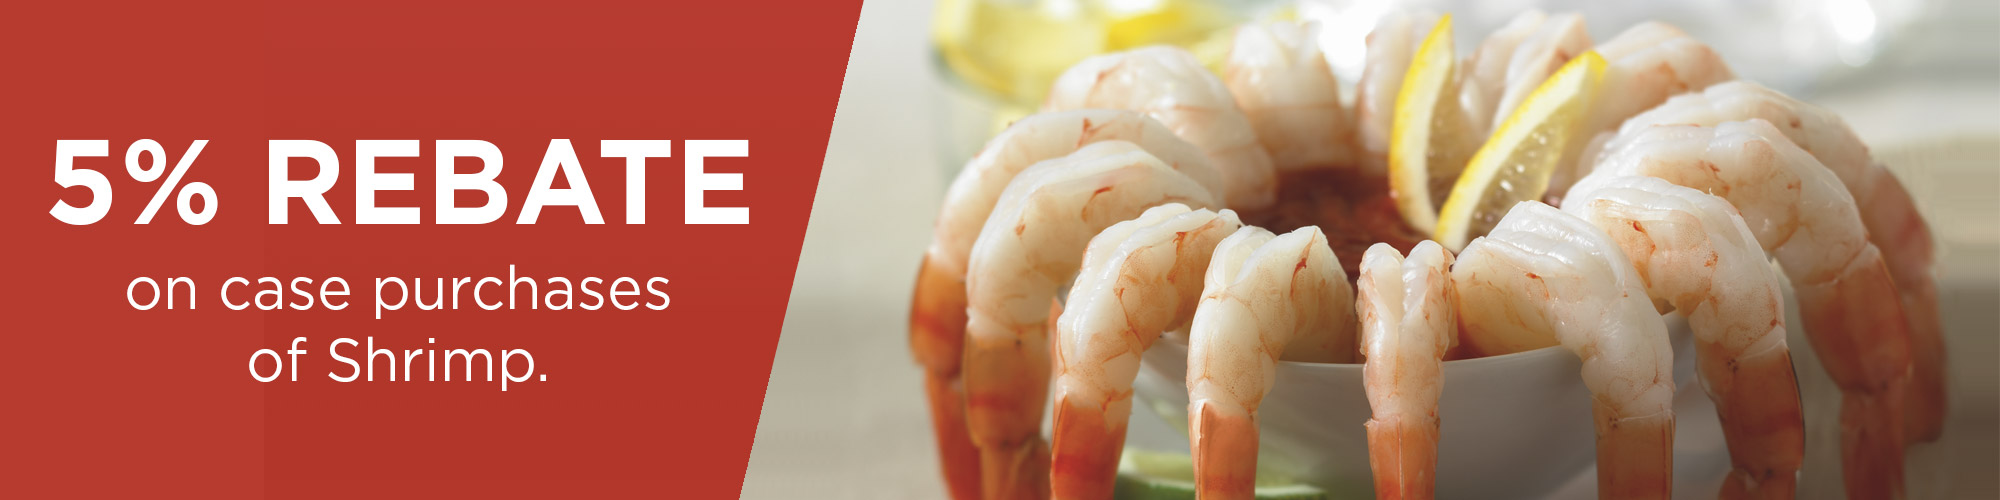 5% Rebate on case purchases of shrimp